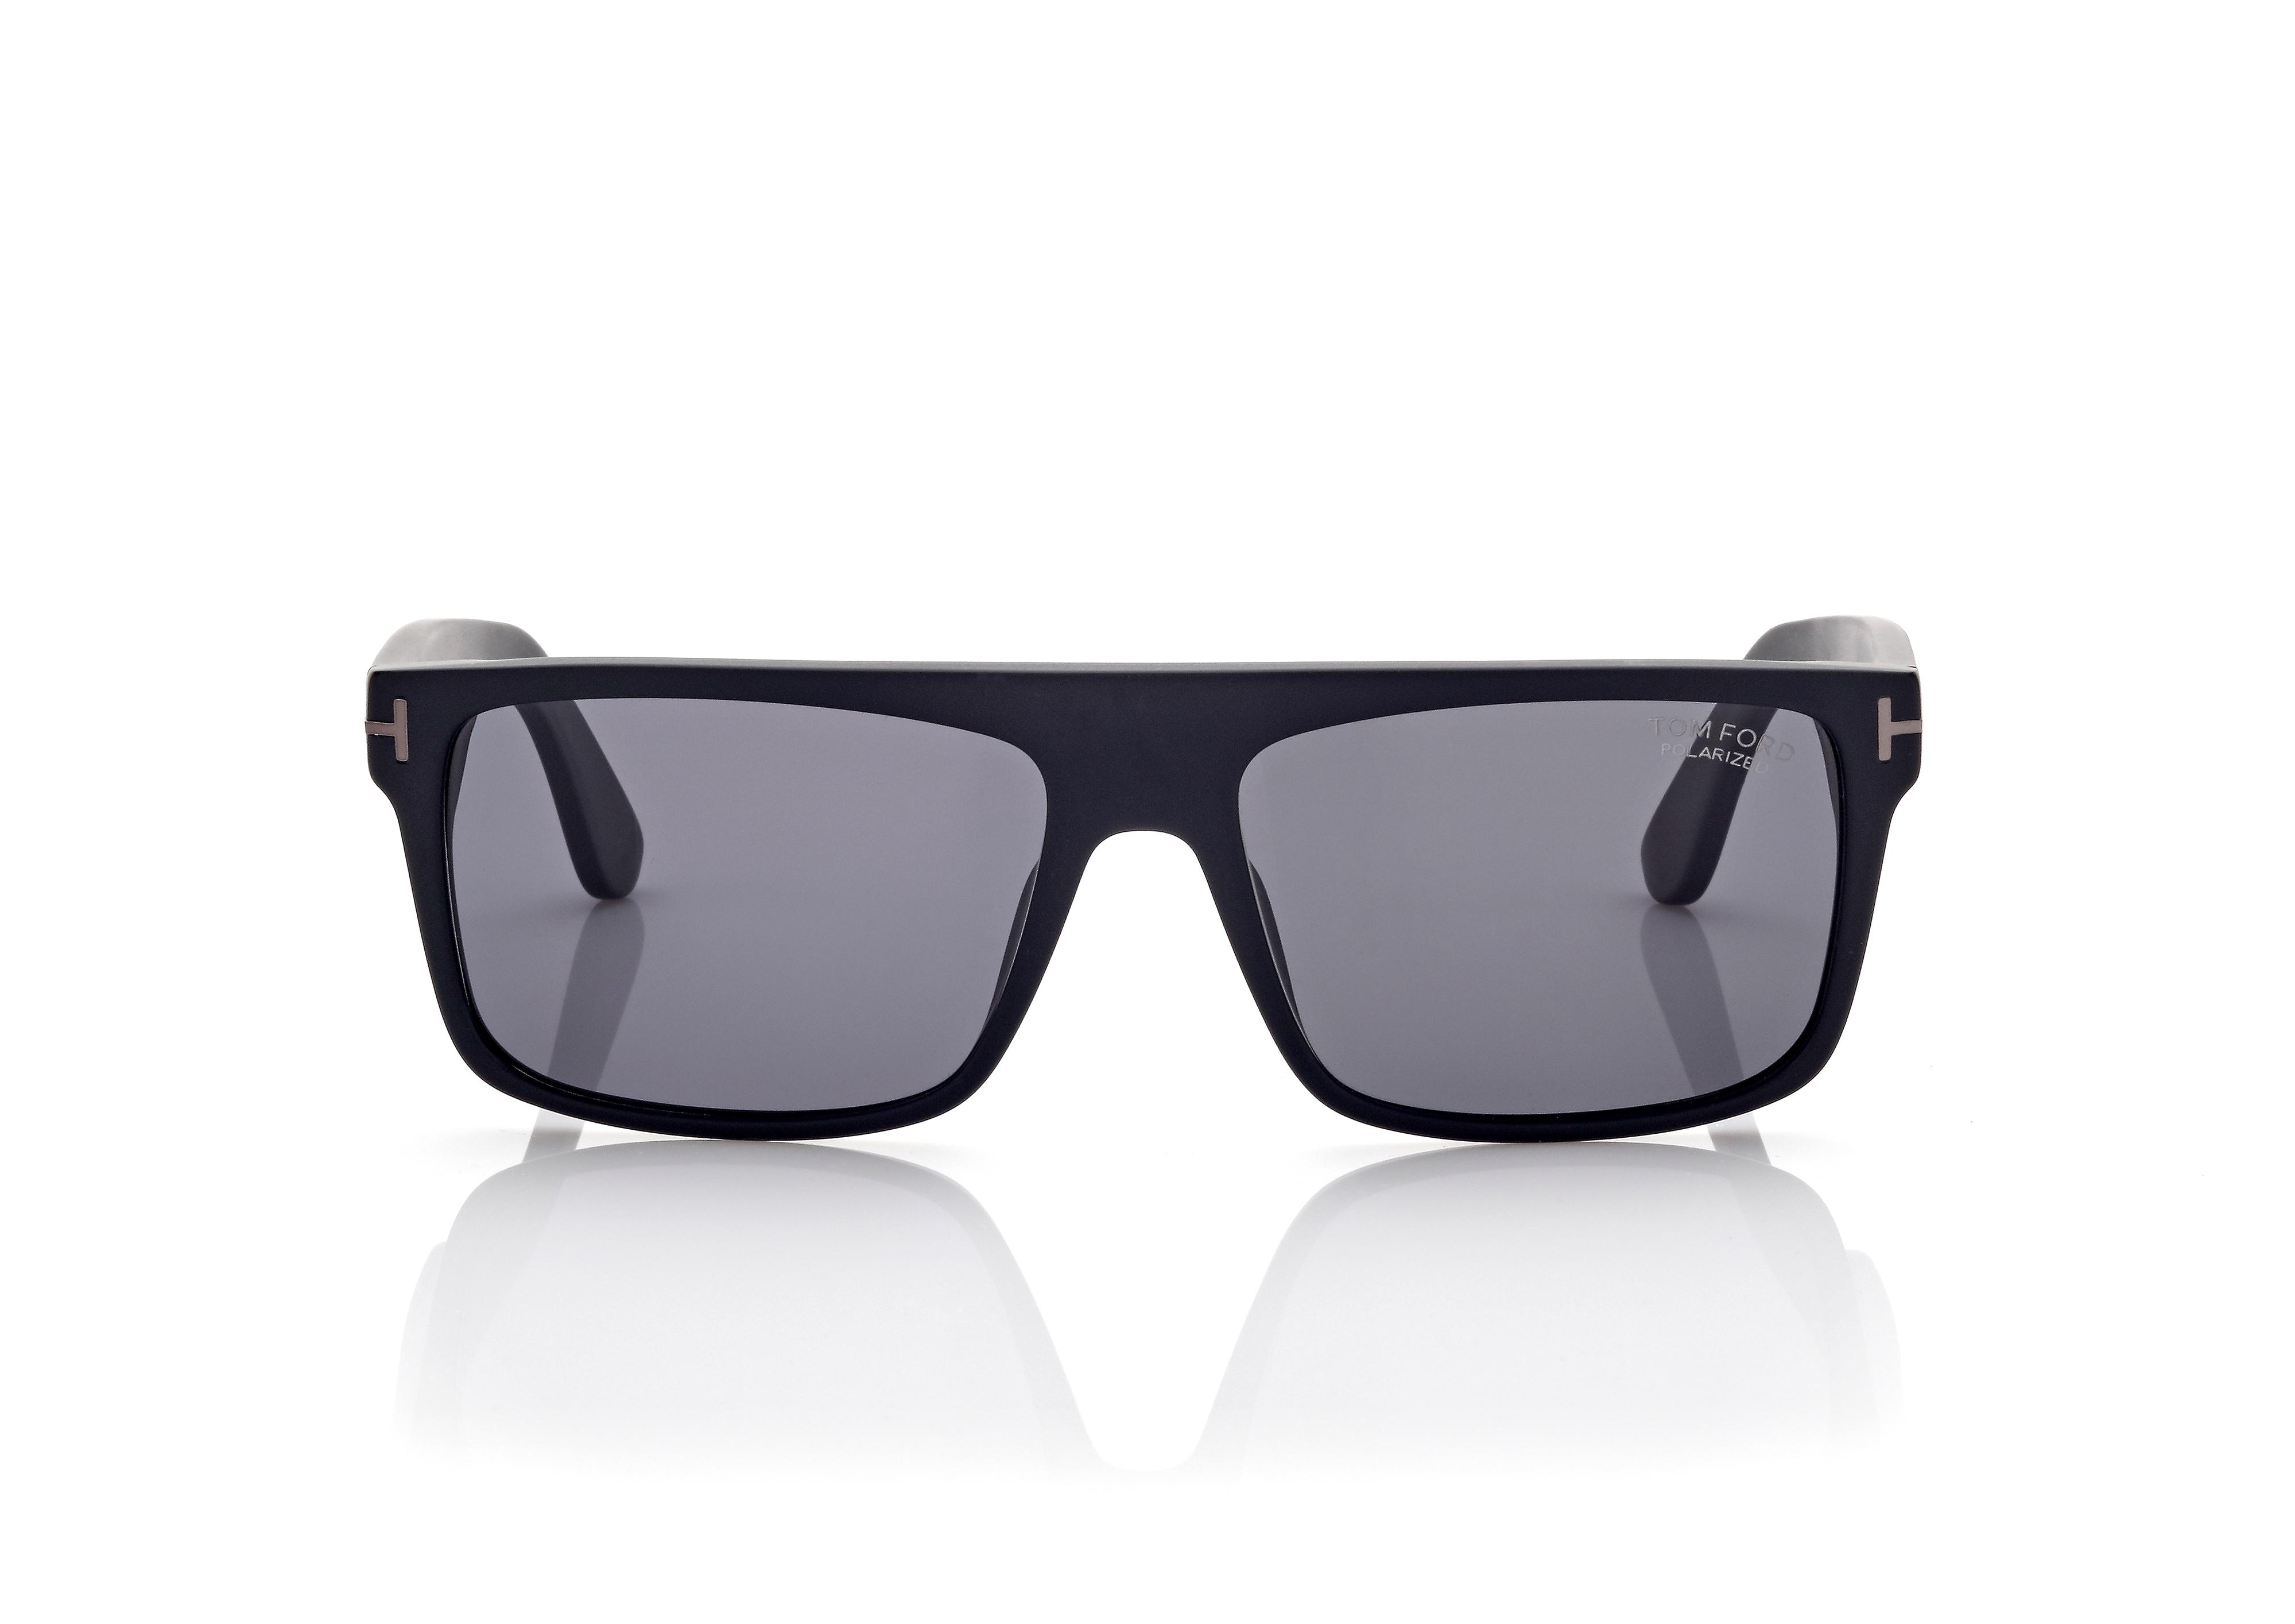 TOM FORD POLARIZED RIVER SUNGLASSES - Maison Weiss